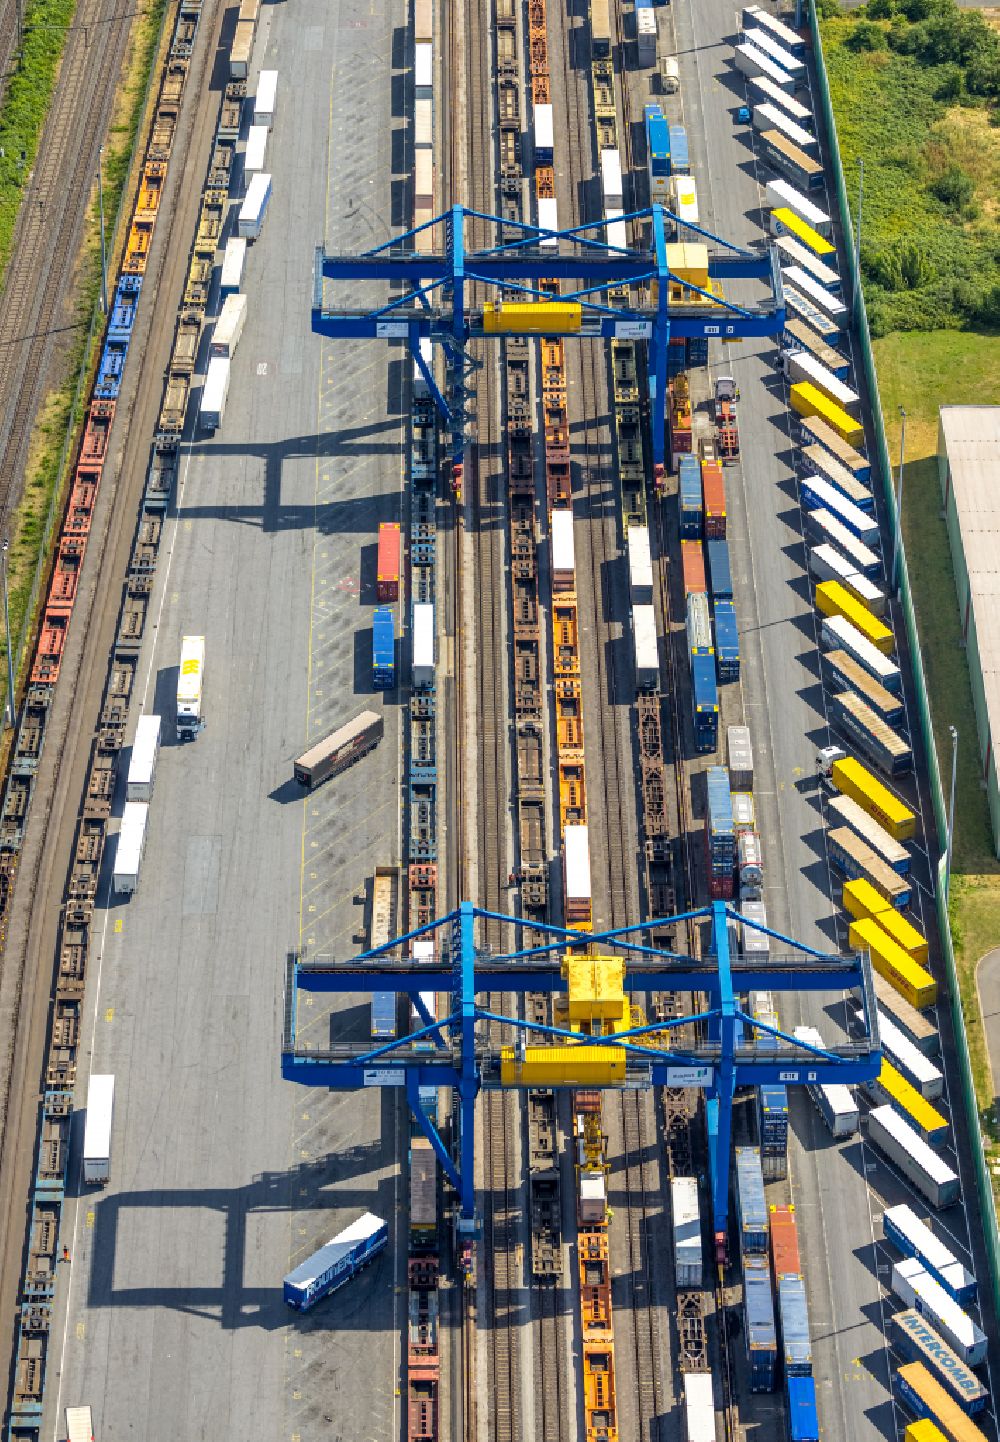 Duisburg from the bird's eye view: Container terminal center in the district Rheinhausen in Duisburg in the state North Rhine-Westphalia, Germany